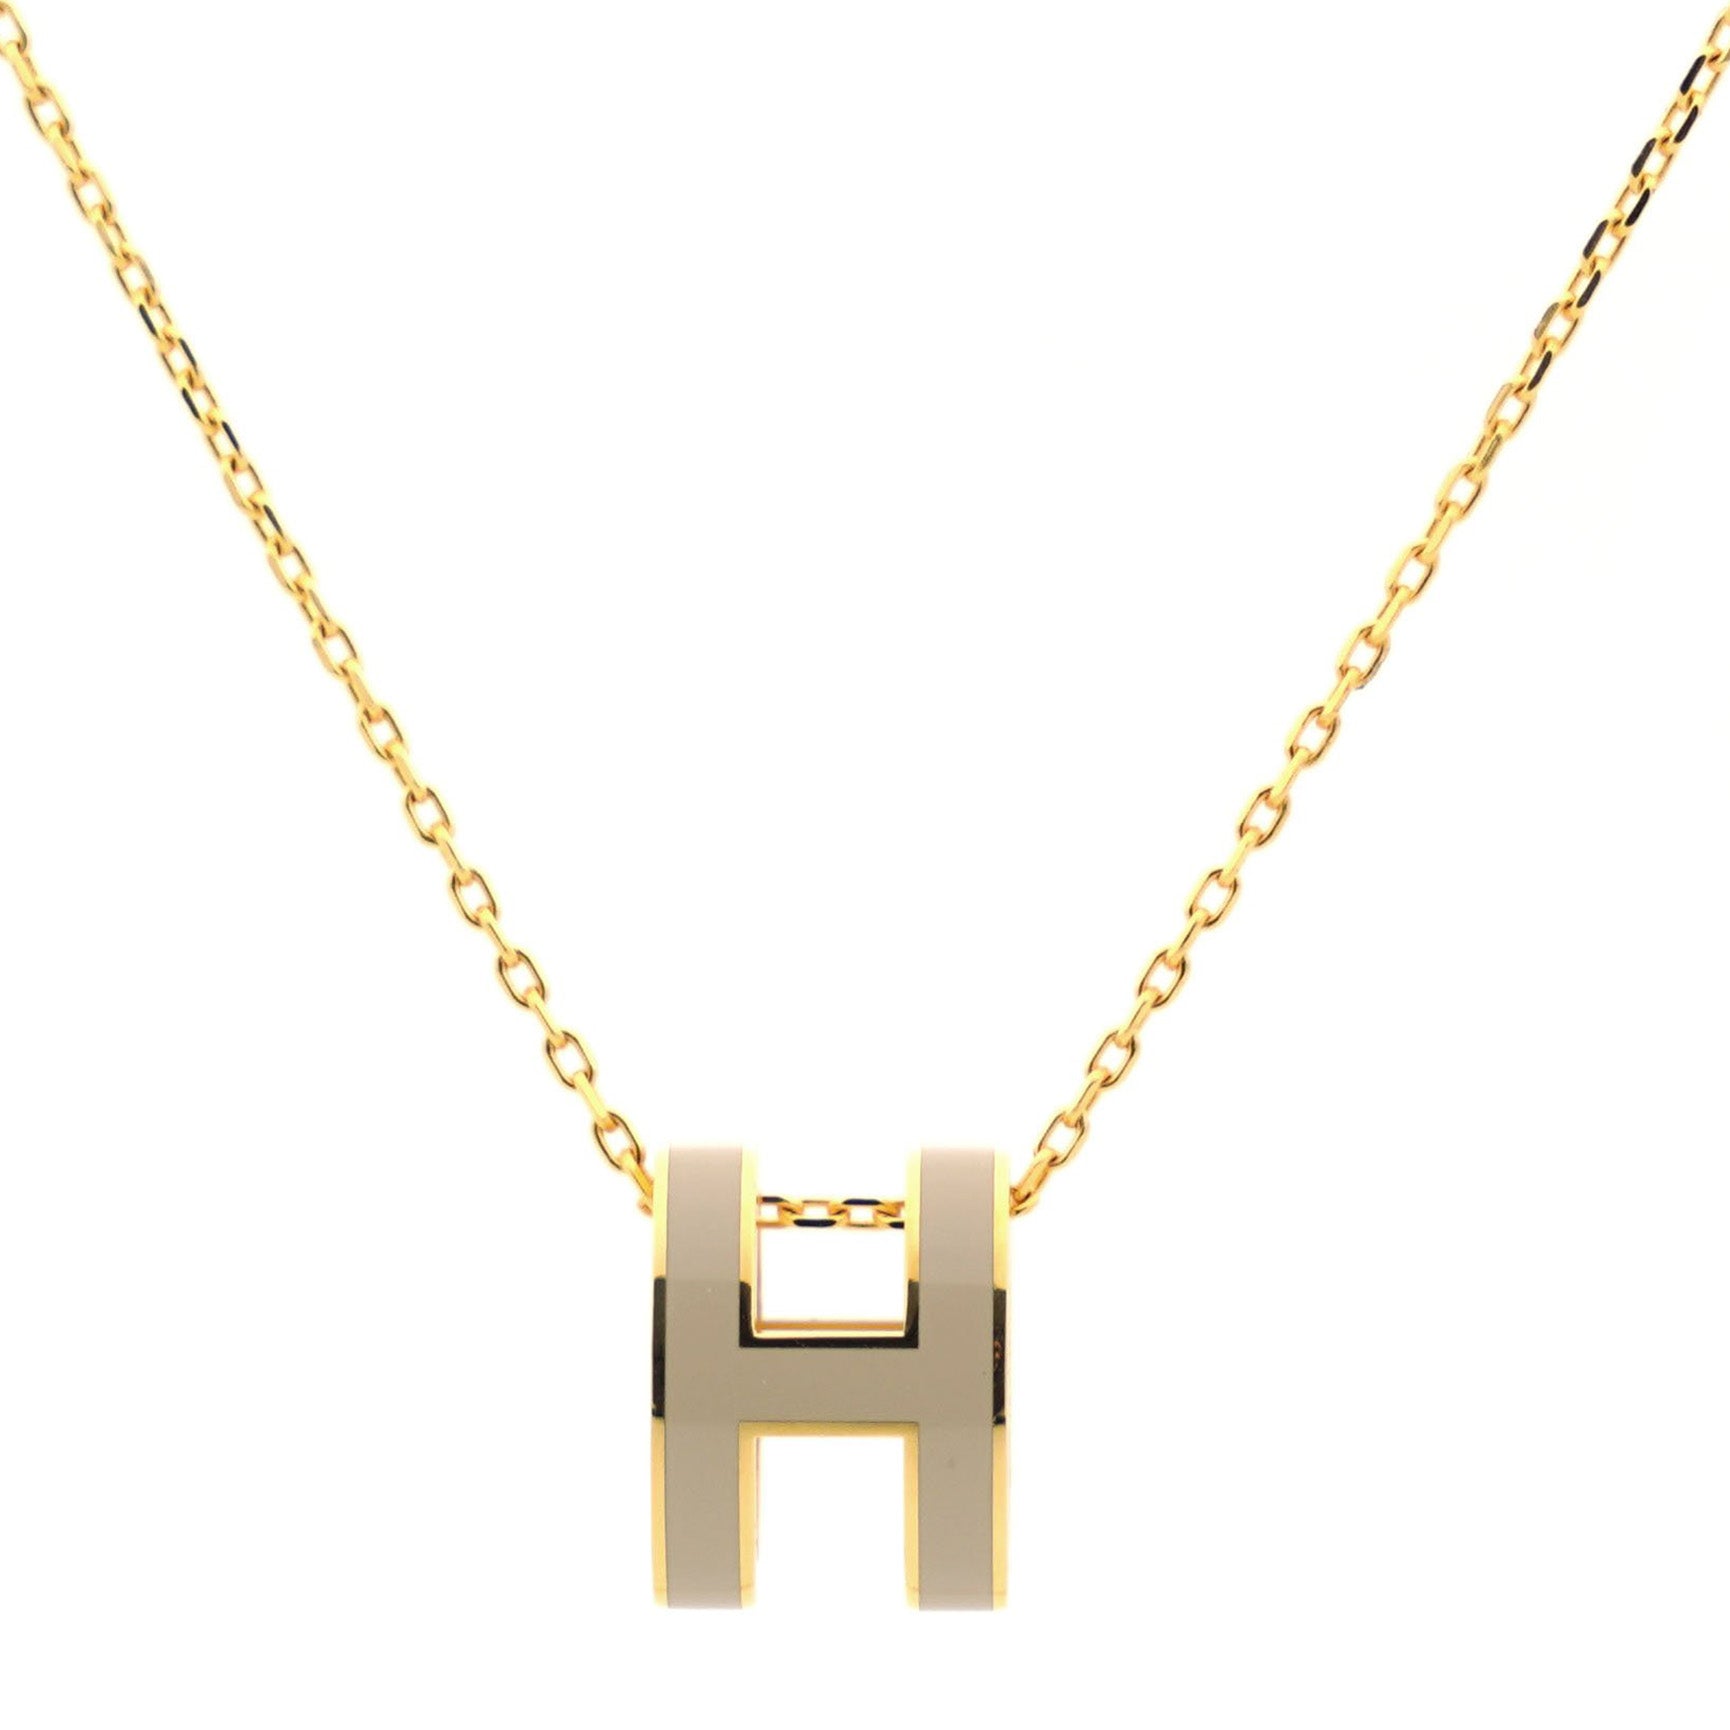 H Grey Lacquer Gold Plated Pendant Necklace